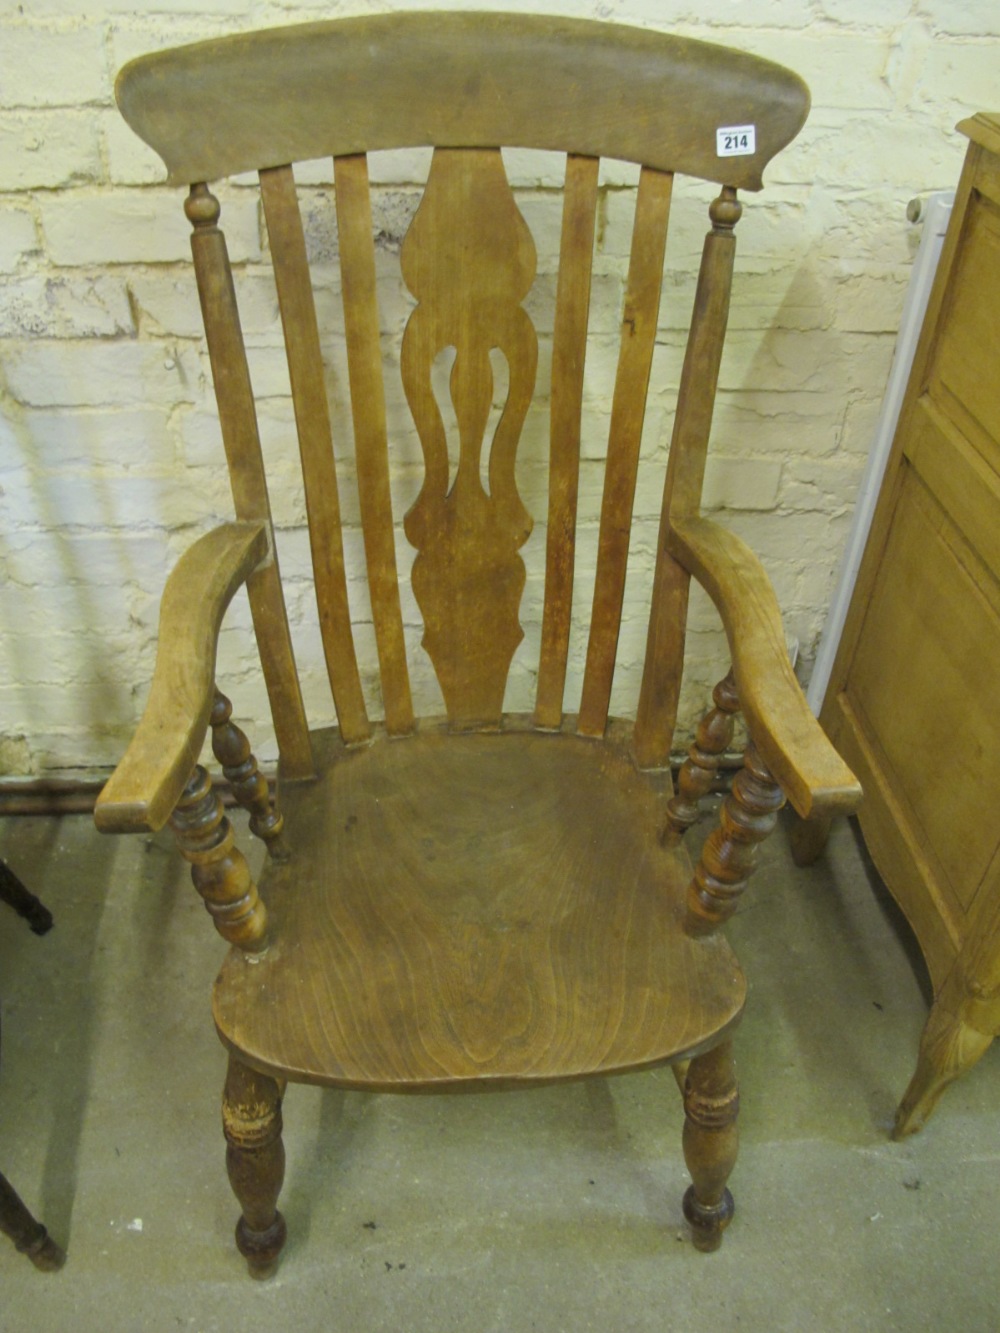 A 19th century ash and elm grandfather chair